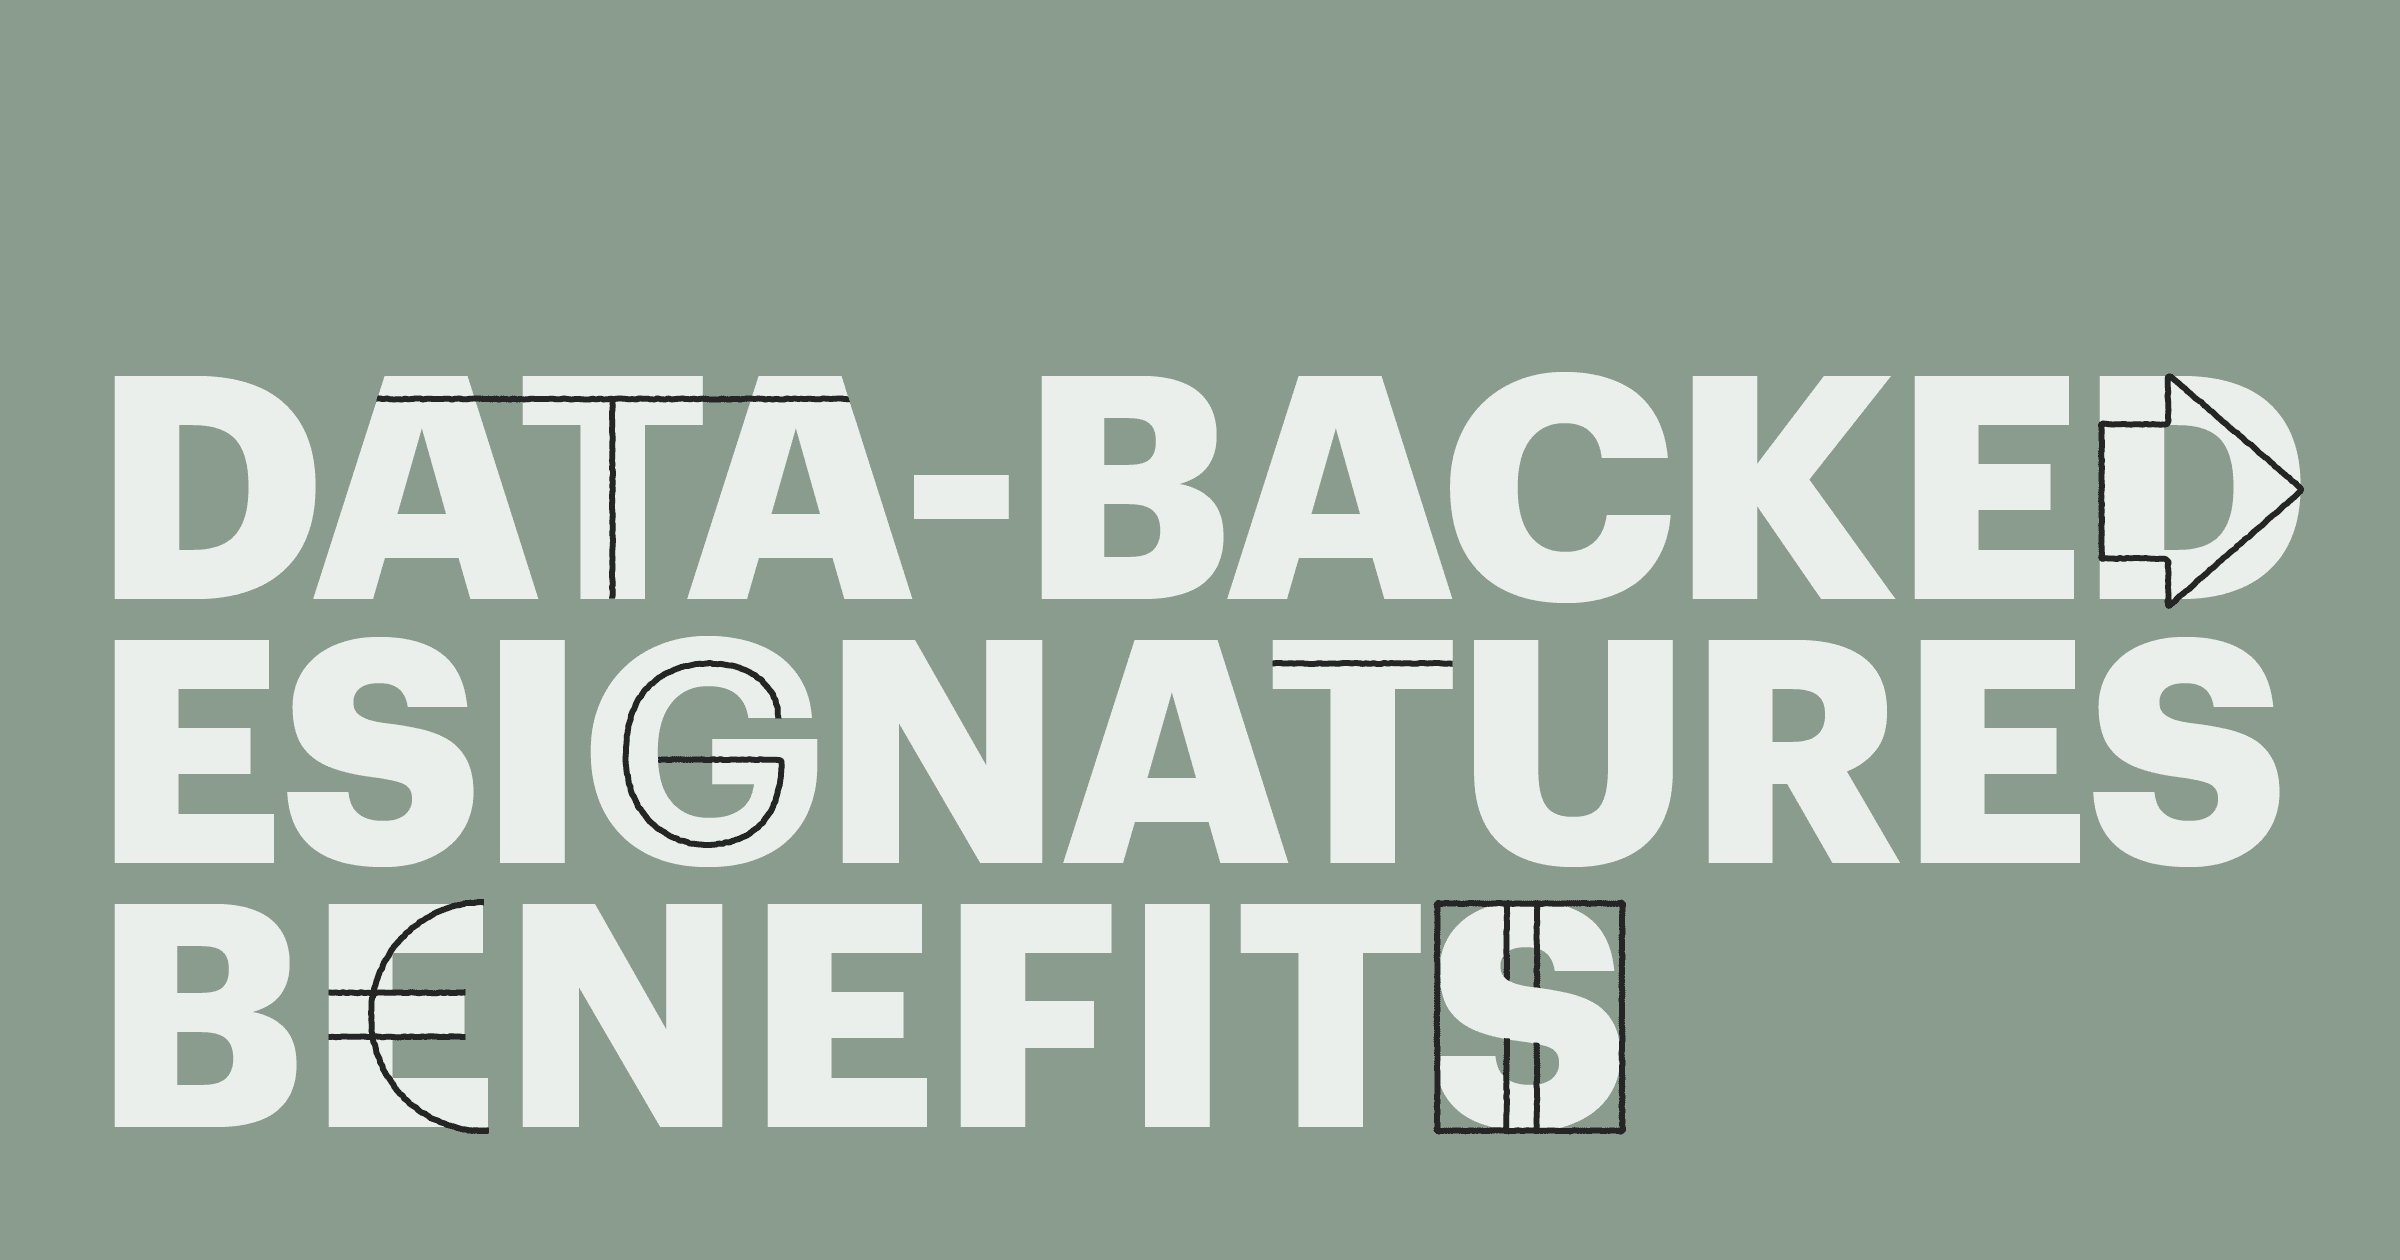 7 data-backed eSignatures benefits that you can replicate in your business